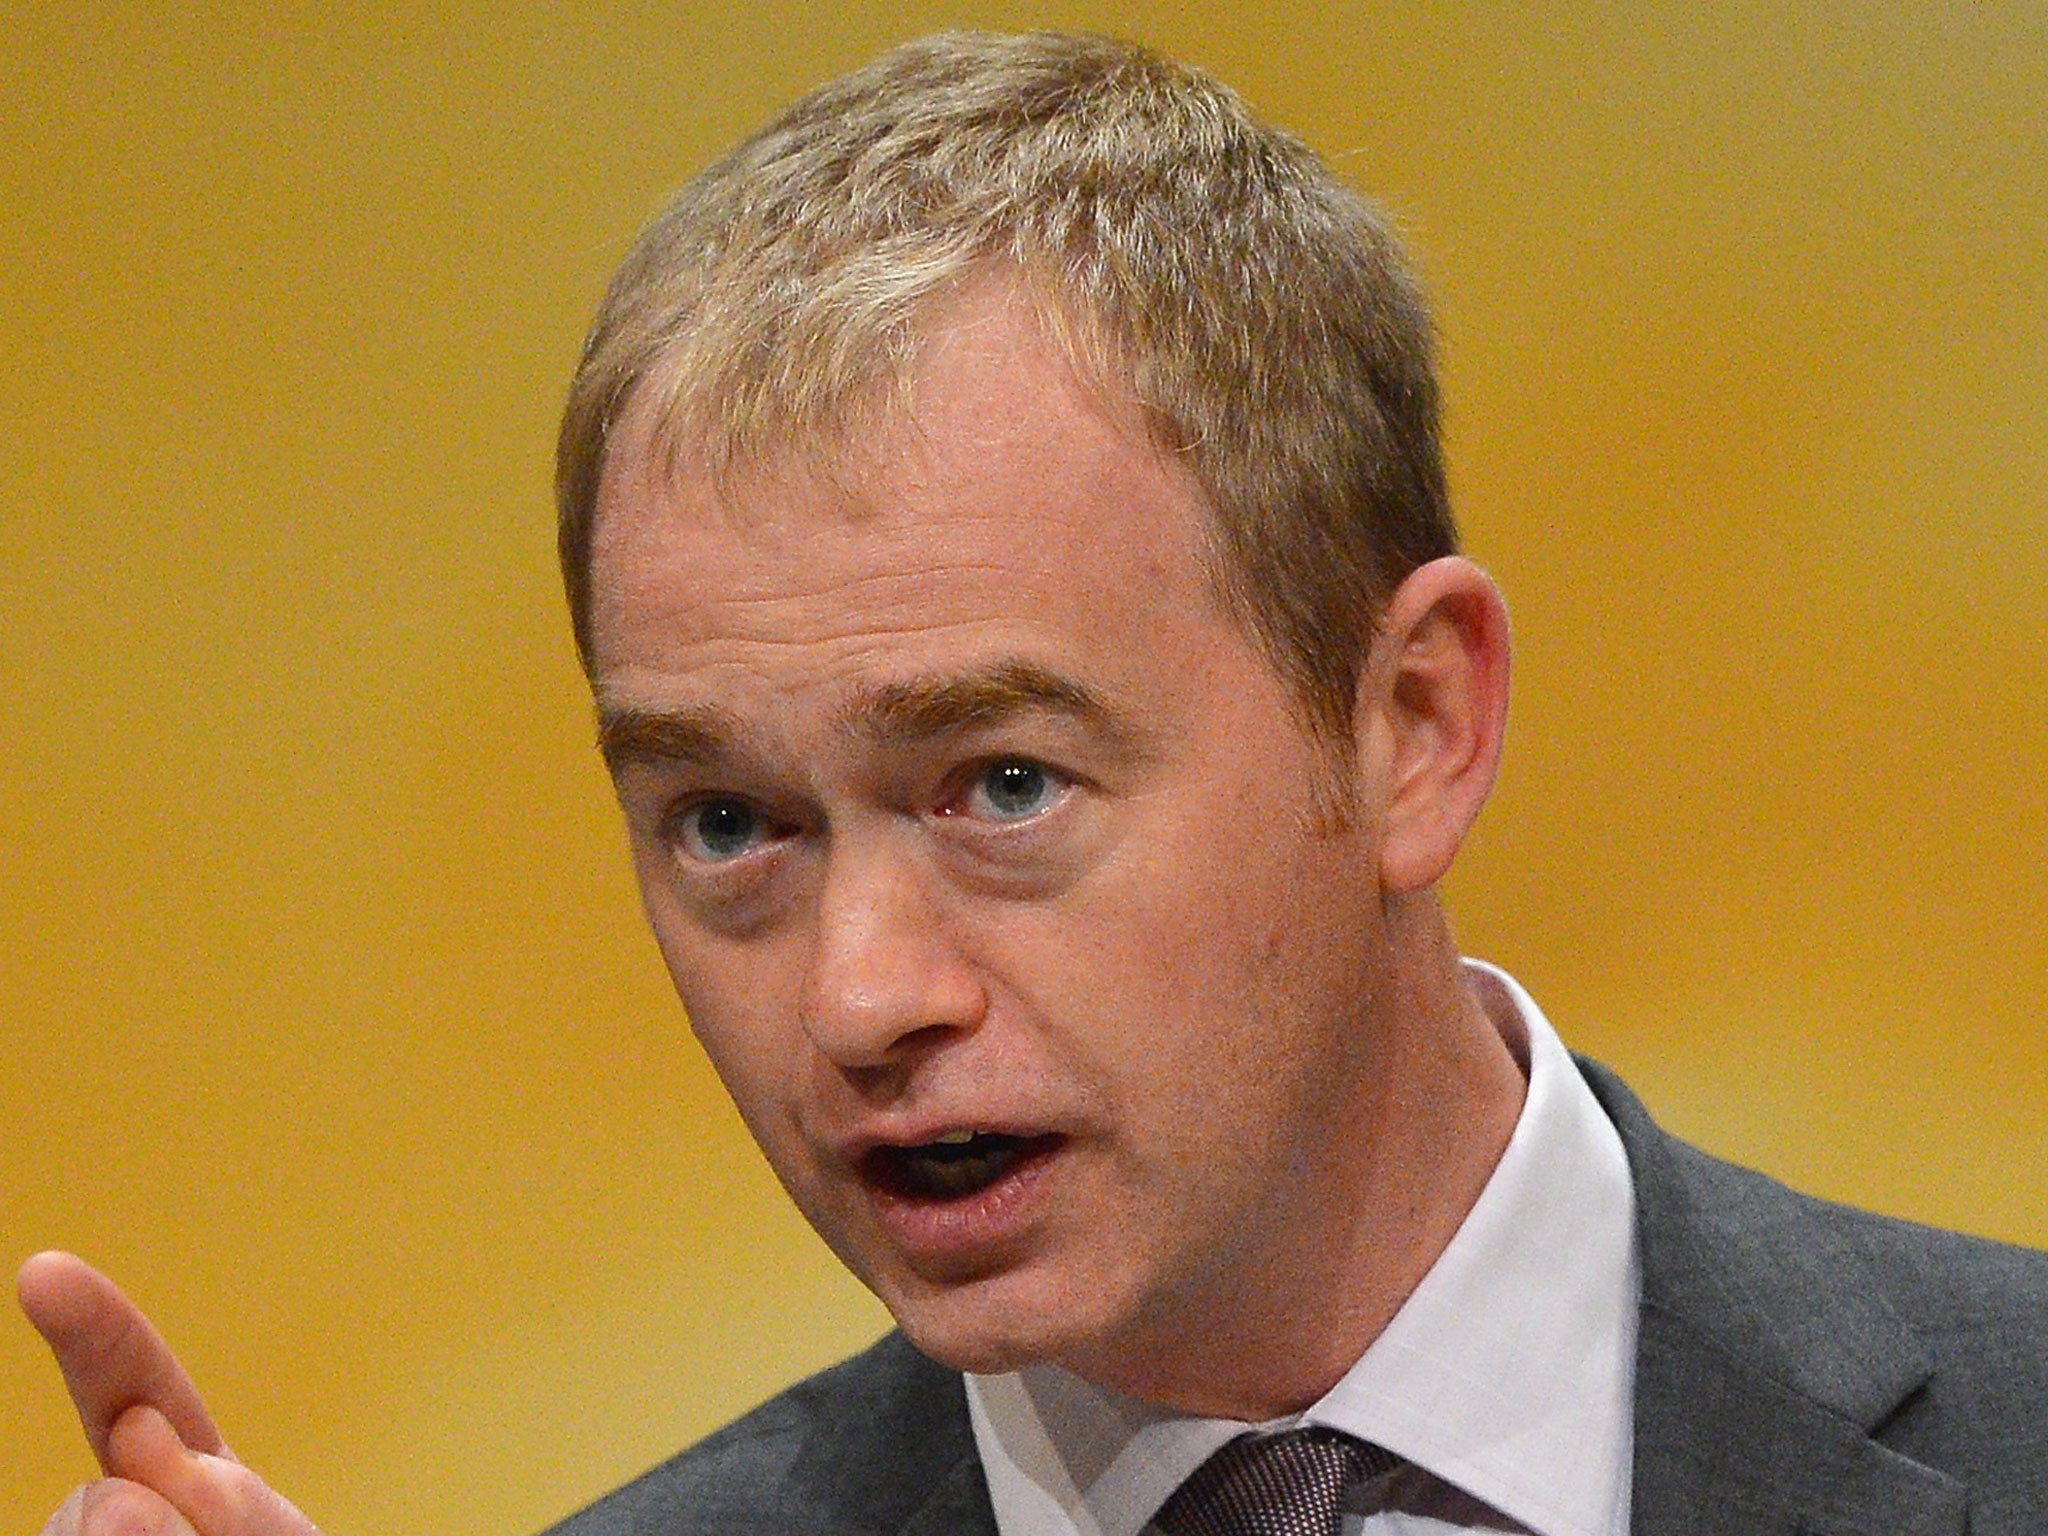 Tim Farron believes that the Lib Dems offer a rallying point for those who believe in Europe